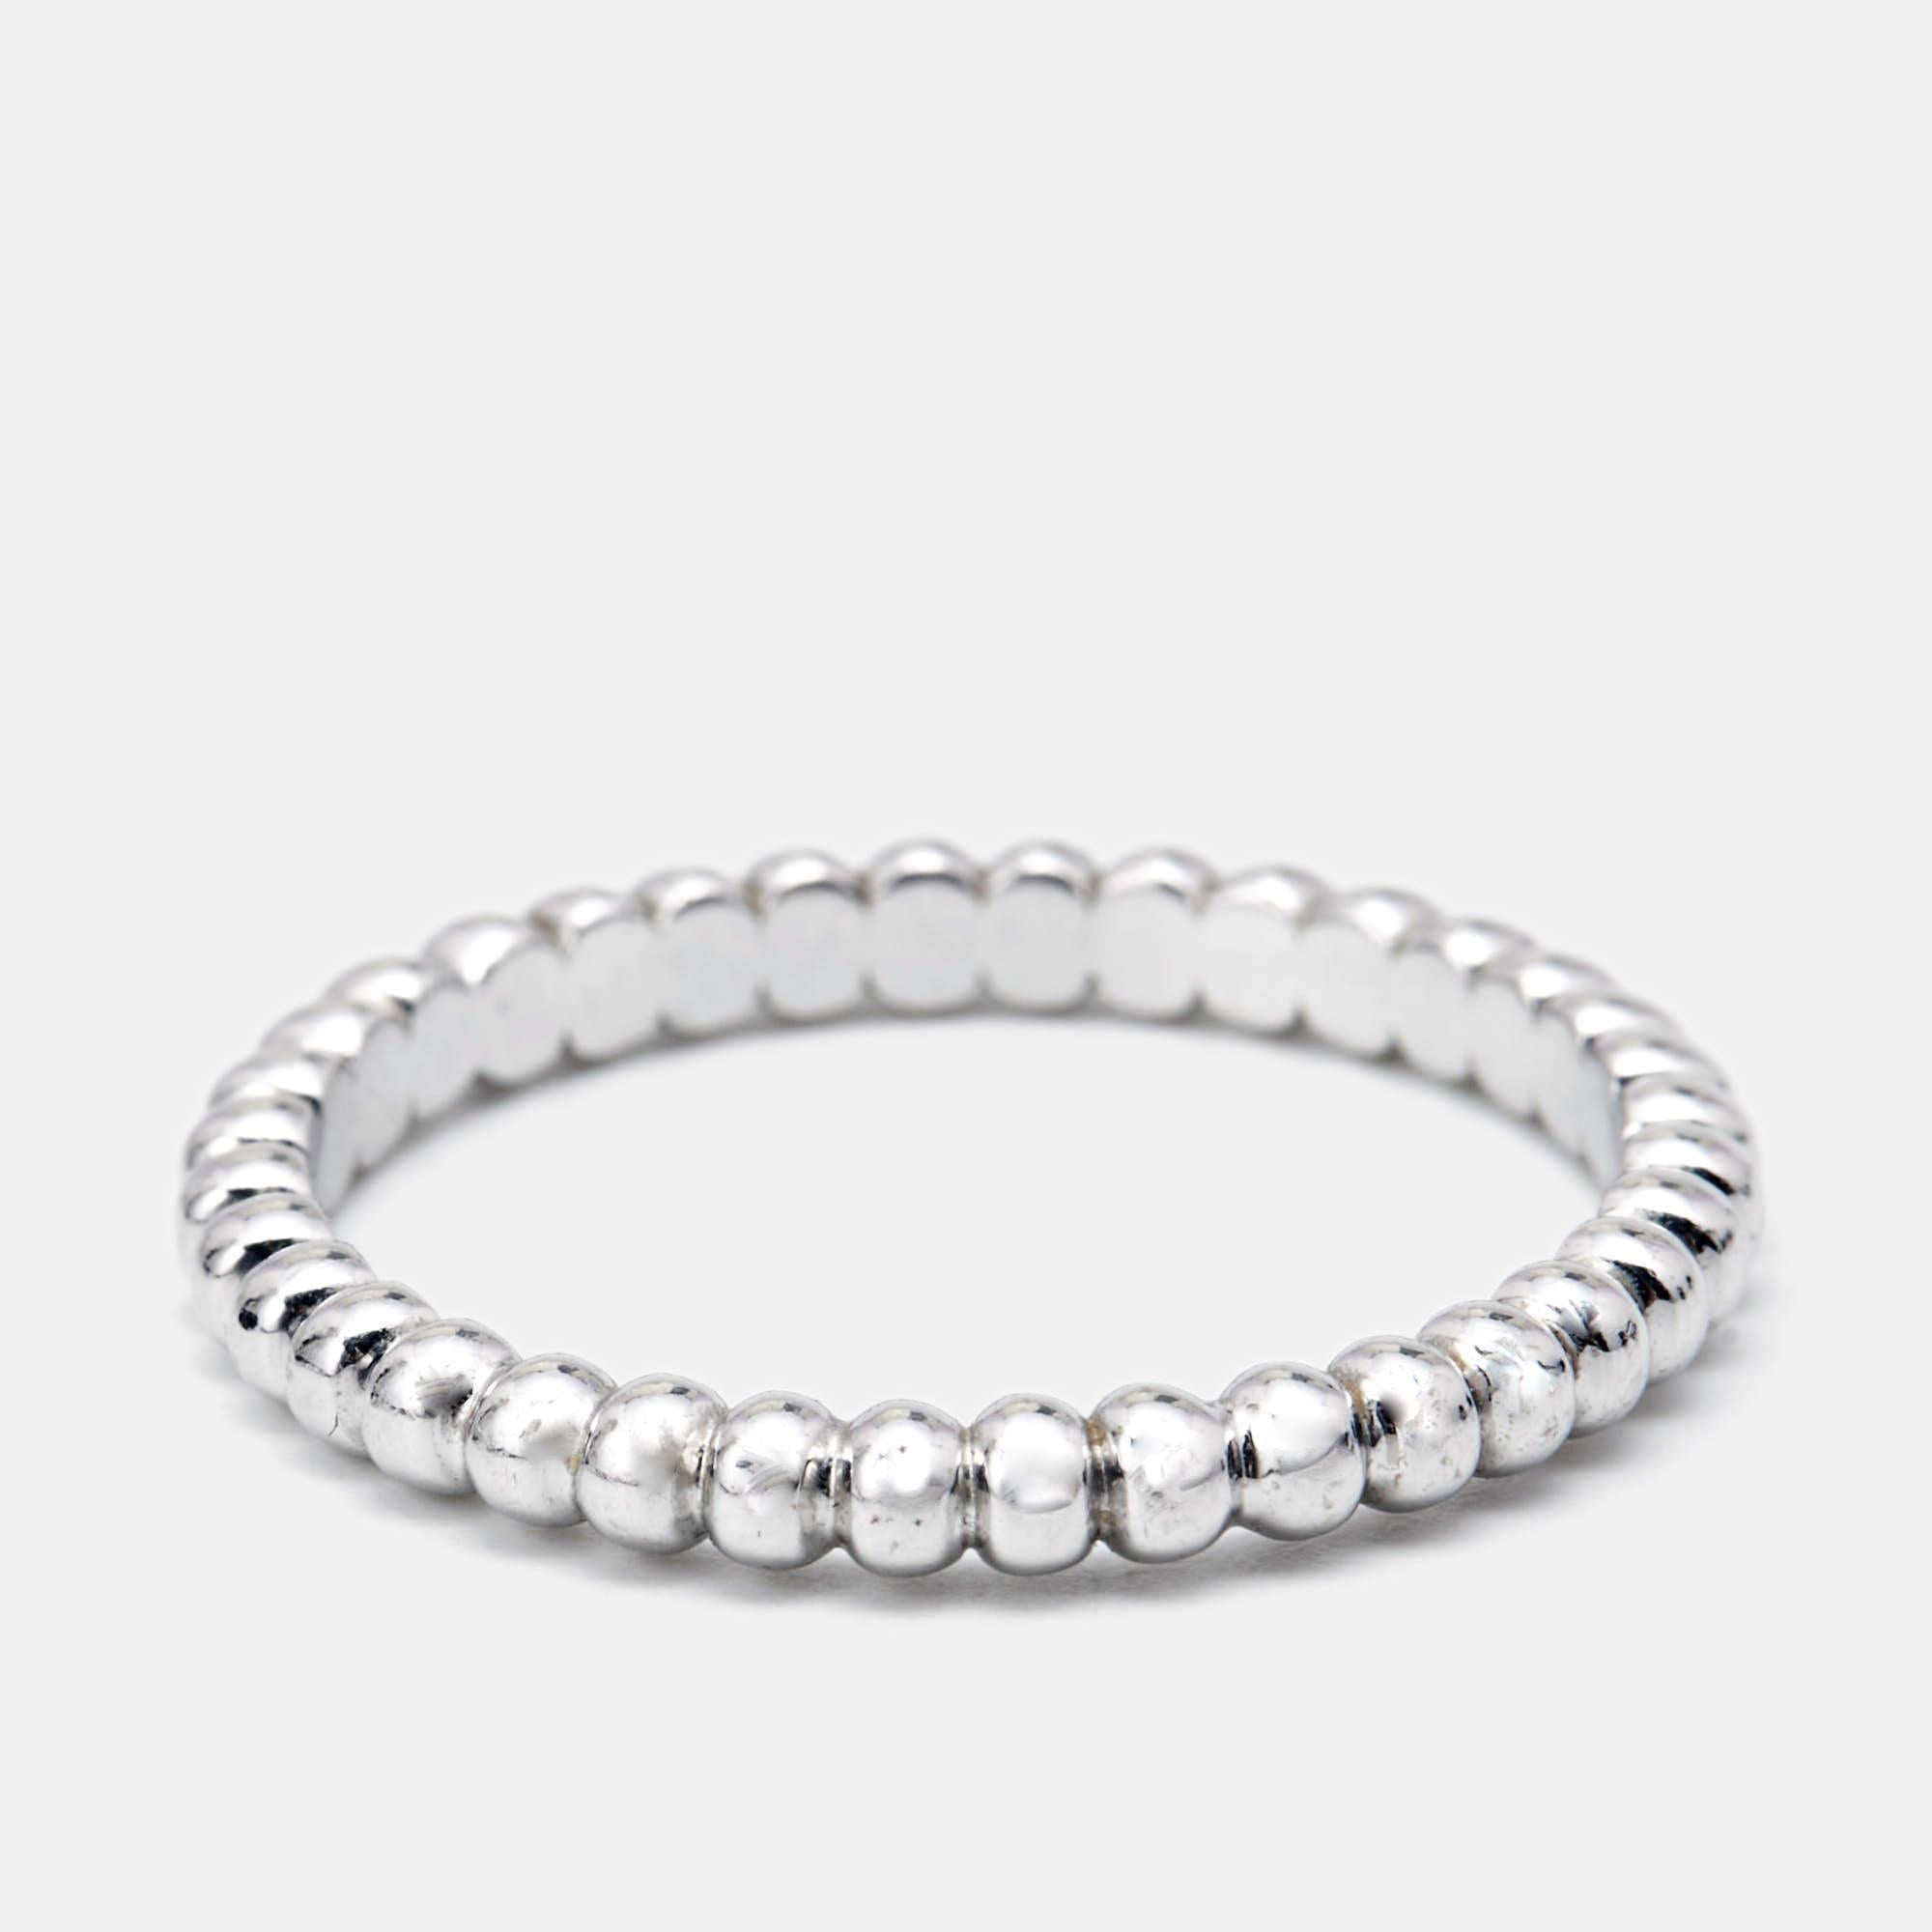 This sleek and classic Perle ring from the house of Van Cleef & Arpels has been expertly crafted in 18k white gold. It comes with an all-over bead detailing. Wear it as a stand-alone ring or stacked with similar band rings for a chic look.

